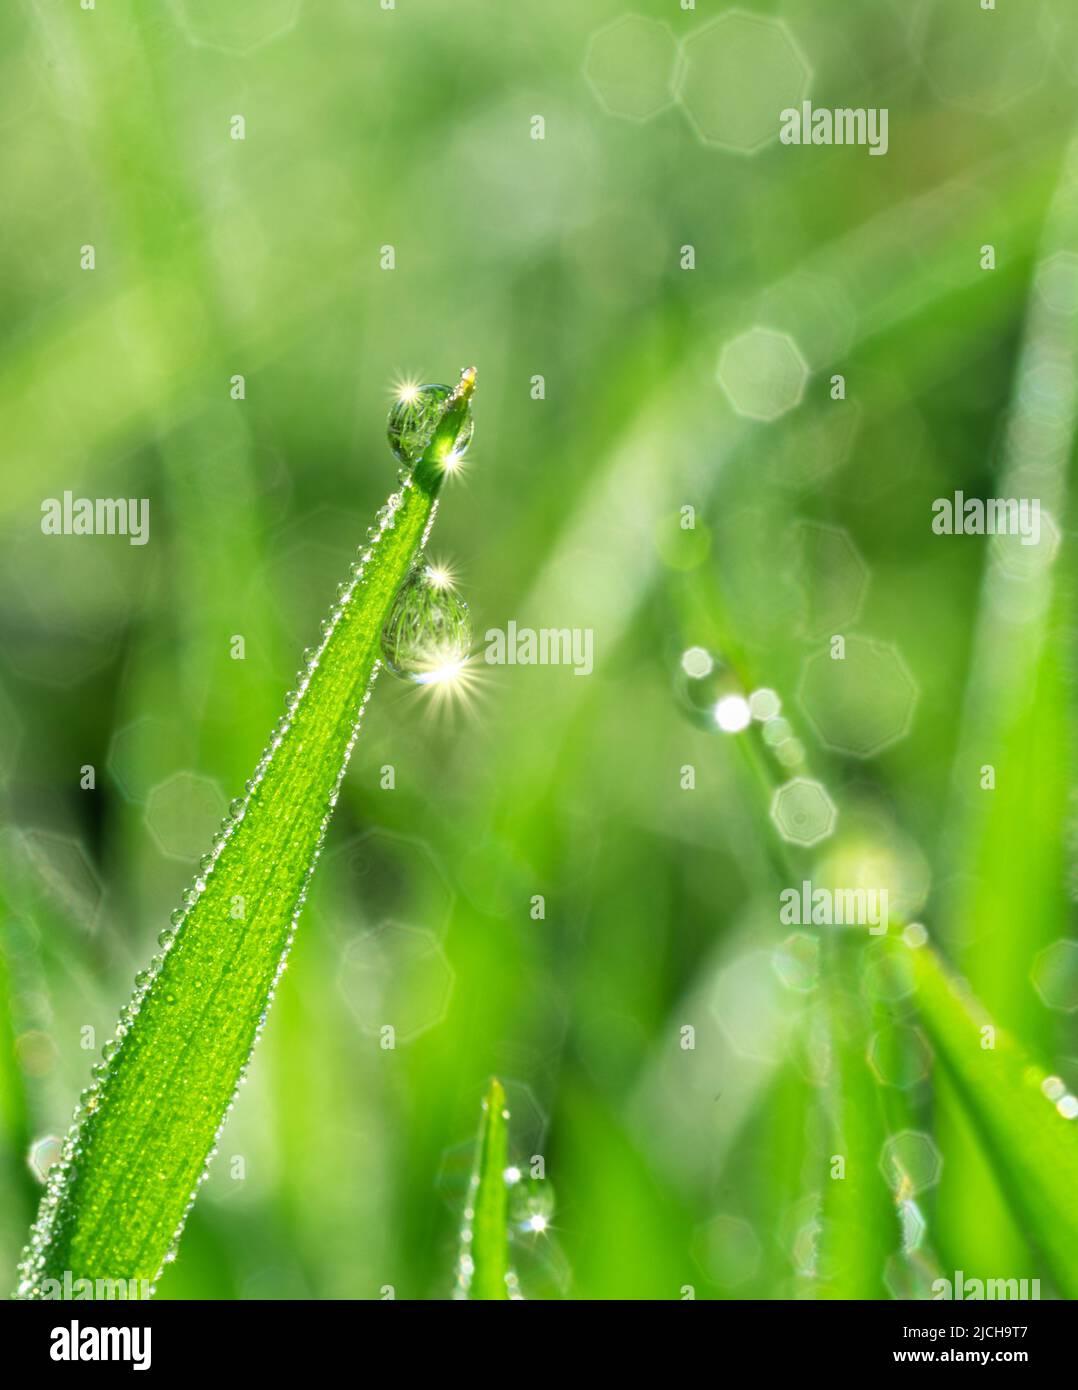 Green grass covered with sparkling dew drops close-up. Purity and freshness concept. Nature background. Stock Photo